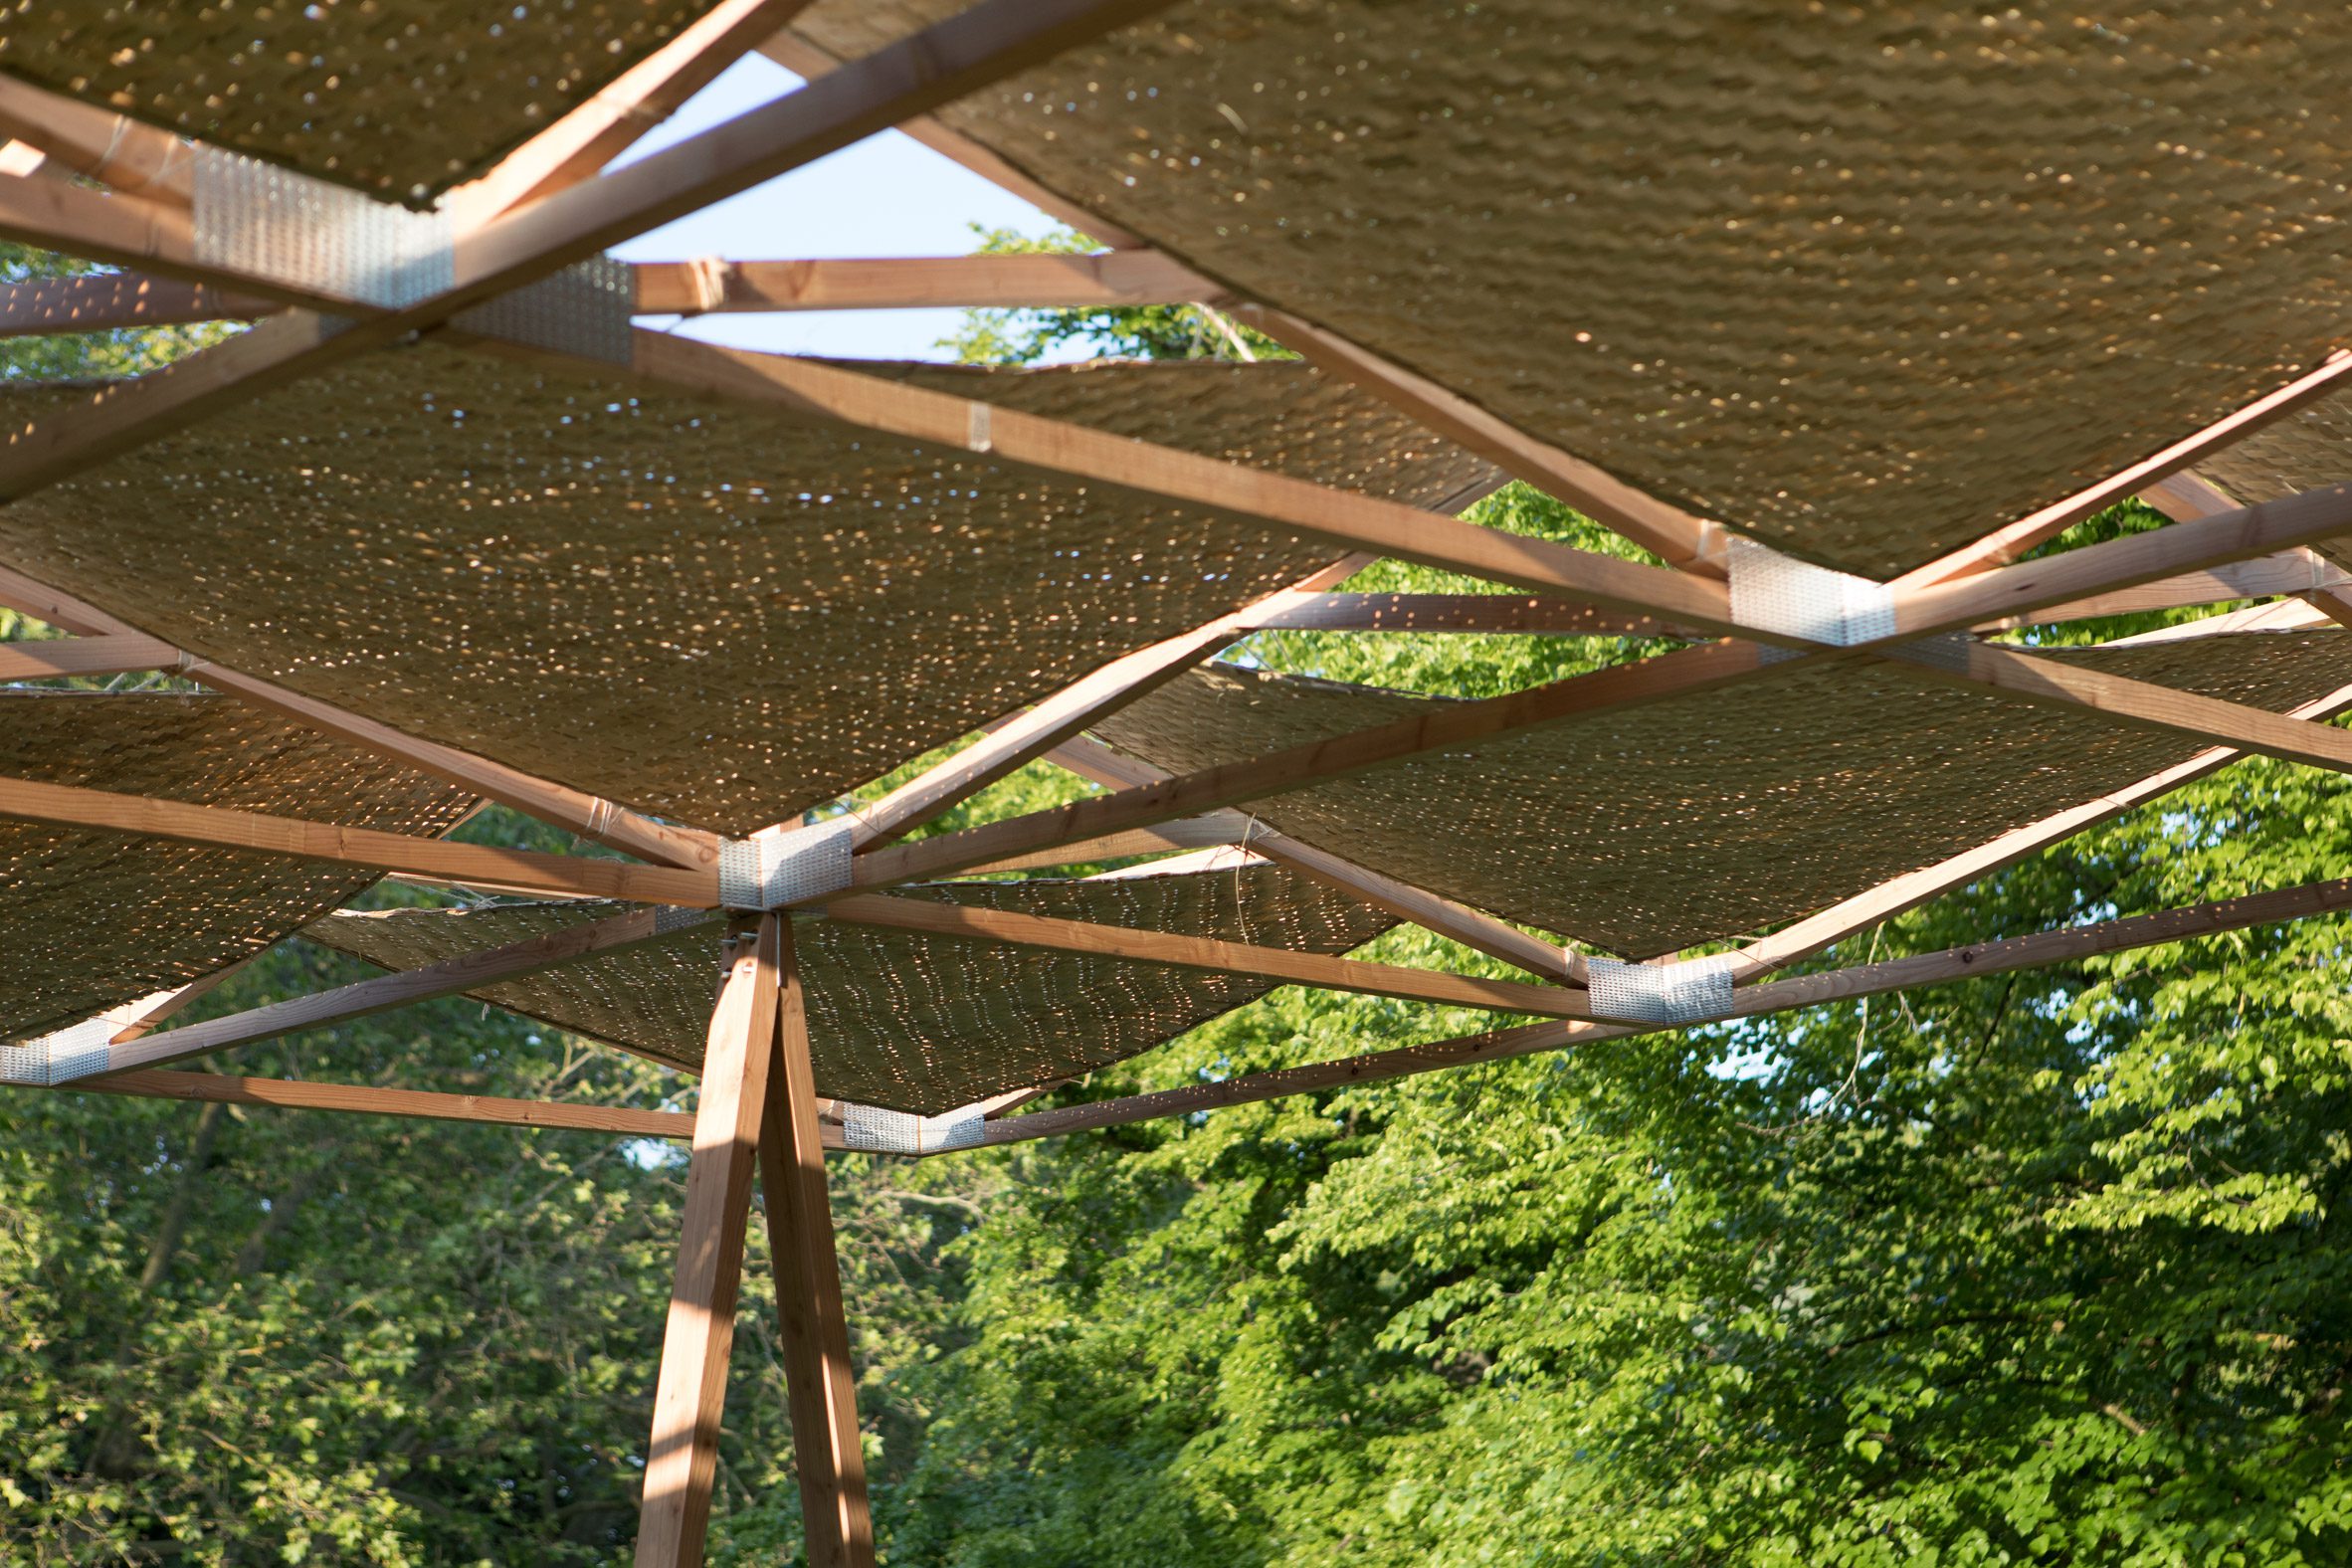 Underside of a timber structure roof with woven bamboo inserts